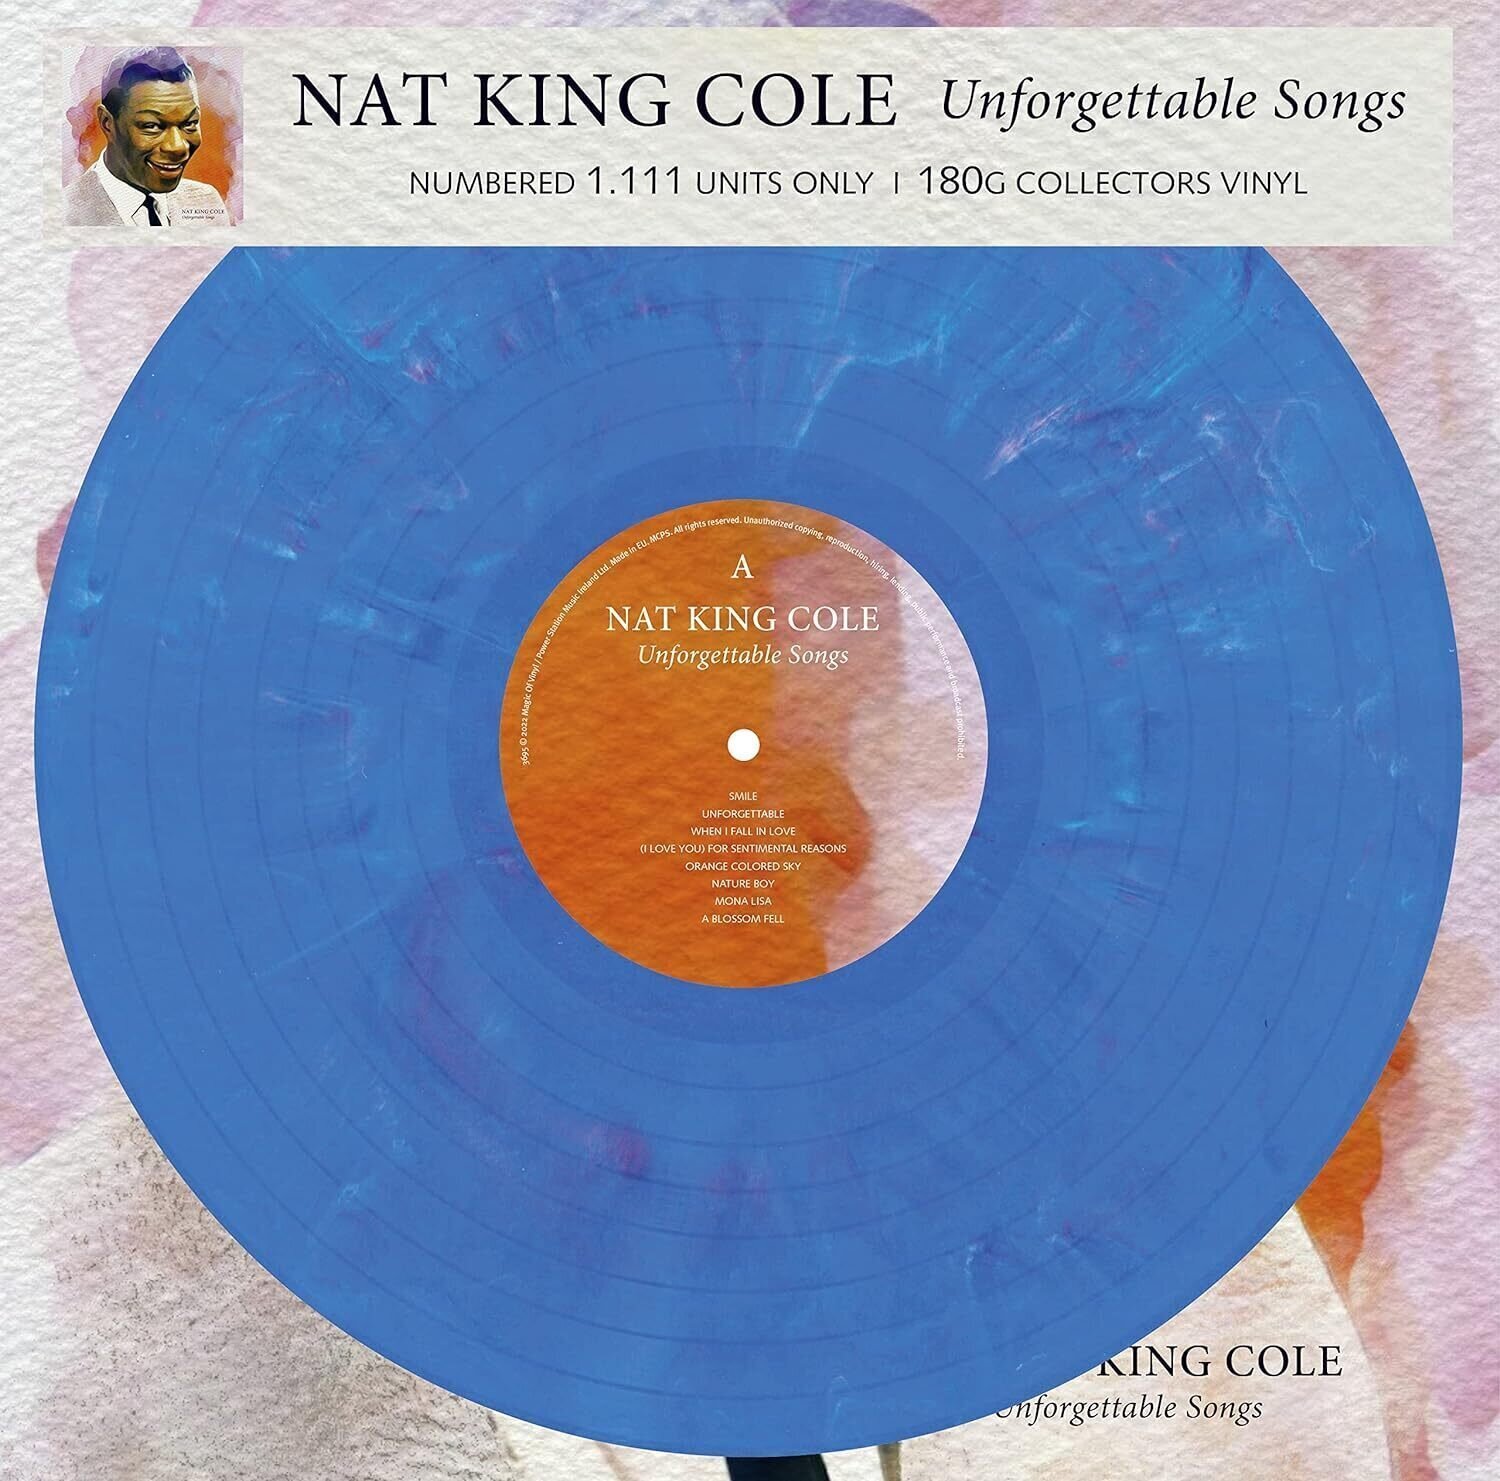 Disco de vinil Nat King Cole - Unforgettable Songs (Limited Edition) (Numbered) (Blue Marbled Coloured) (LP)